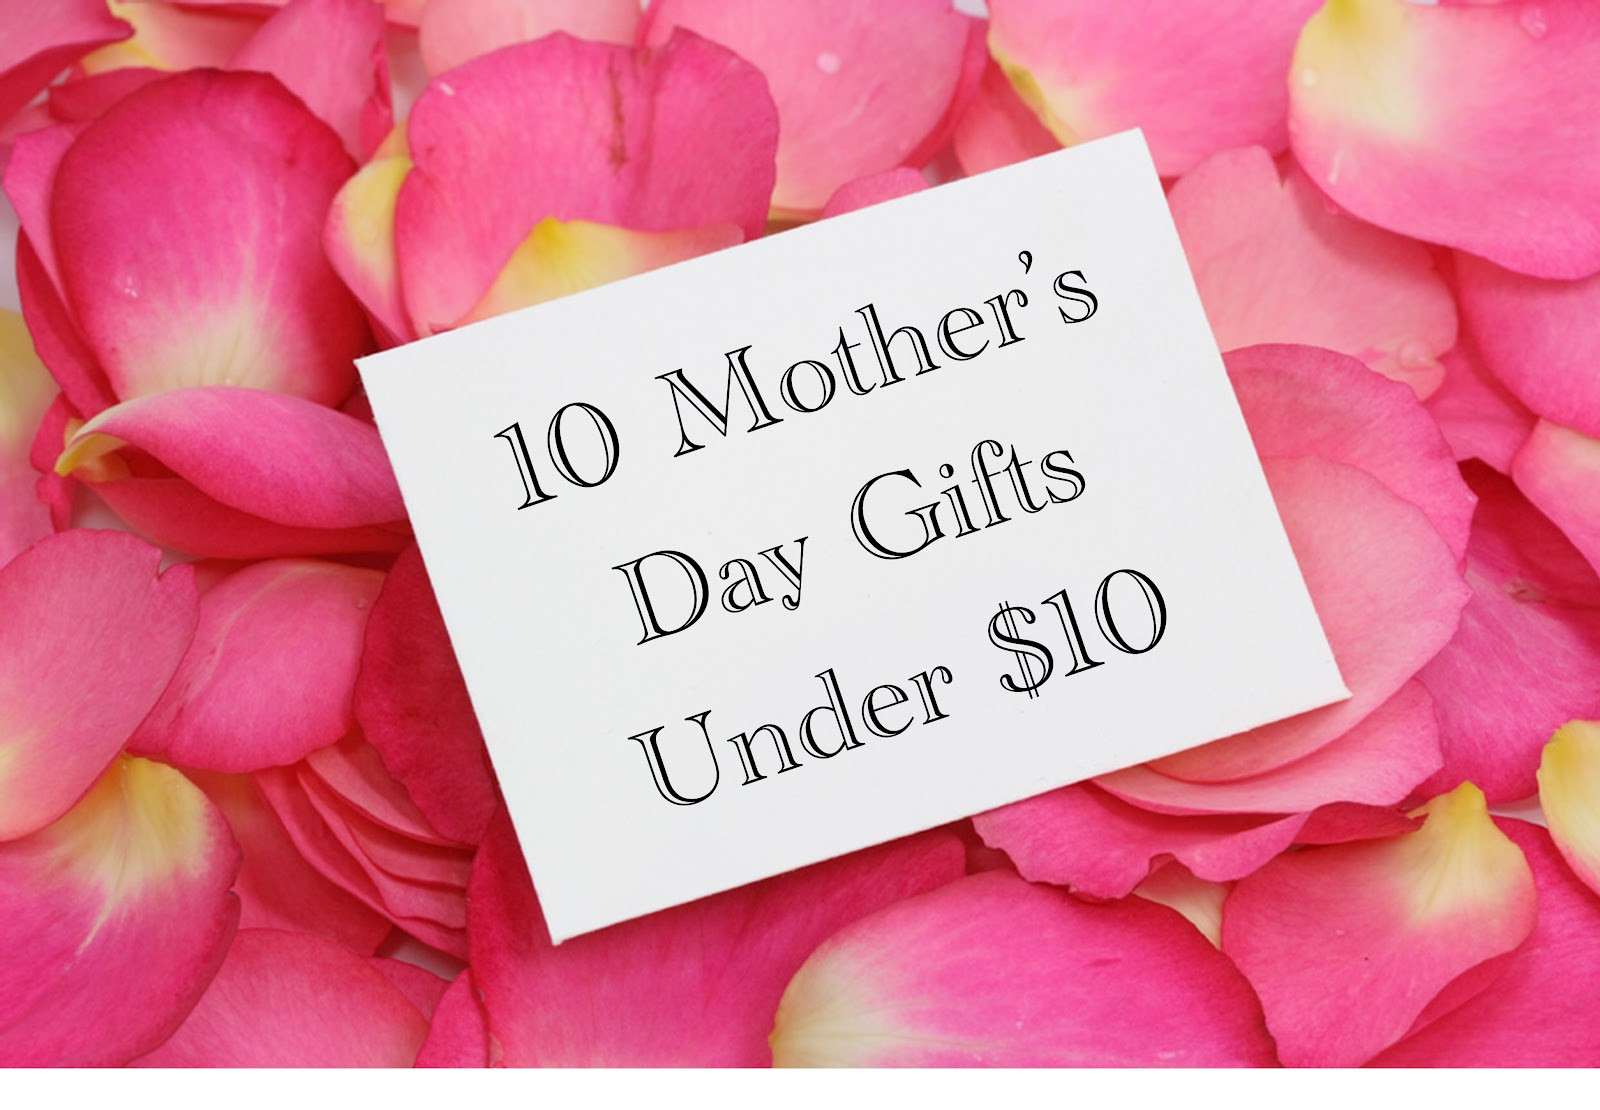 Mother's Day Gifts Under $10
 Life s Joy 10 Mother s Day Gifts Under $10